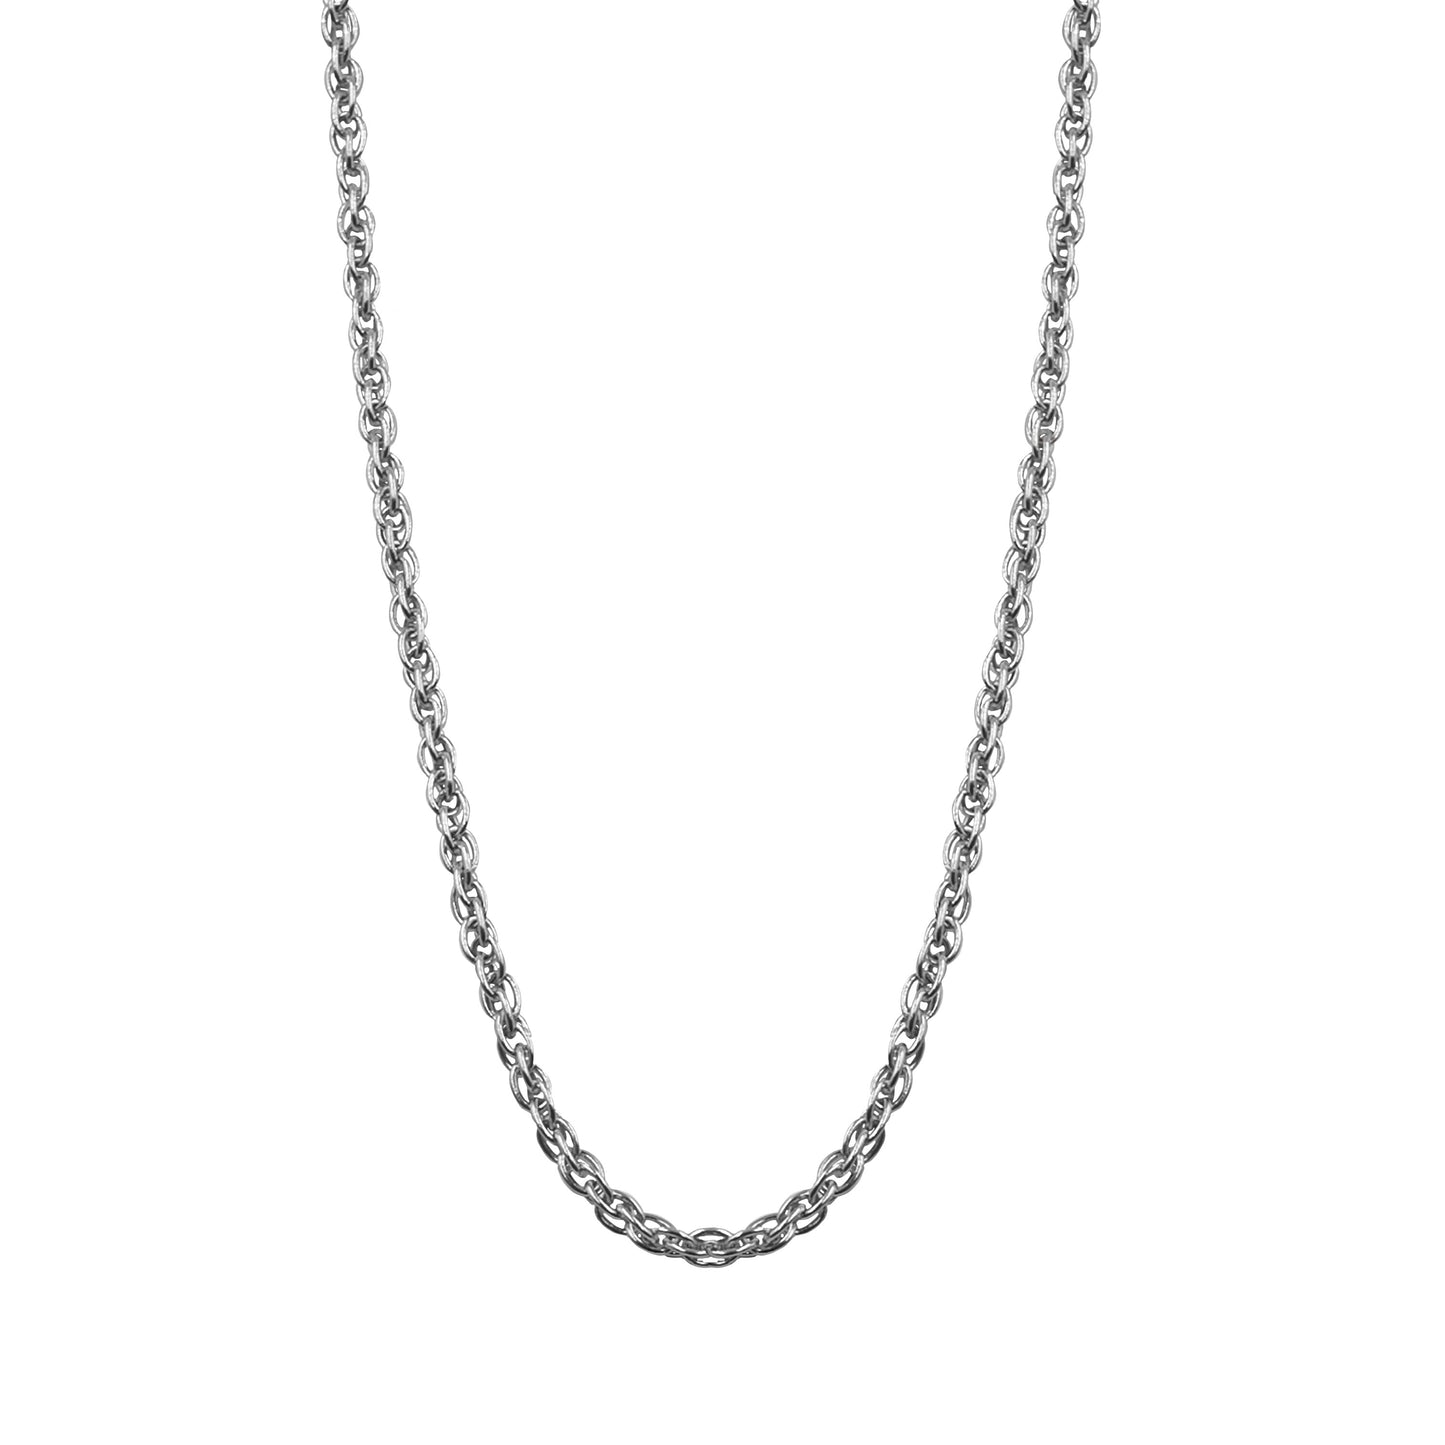 Maker Collection - Silver Twisted Ornate Necklace Chain